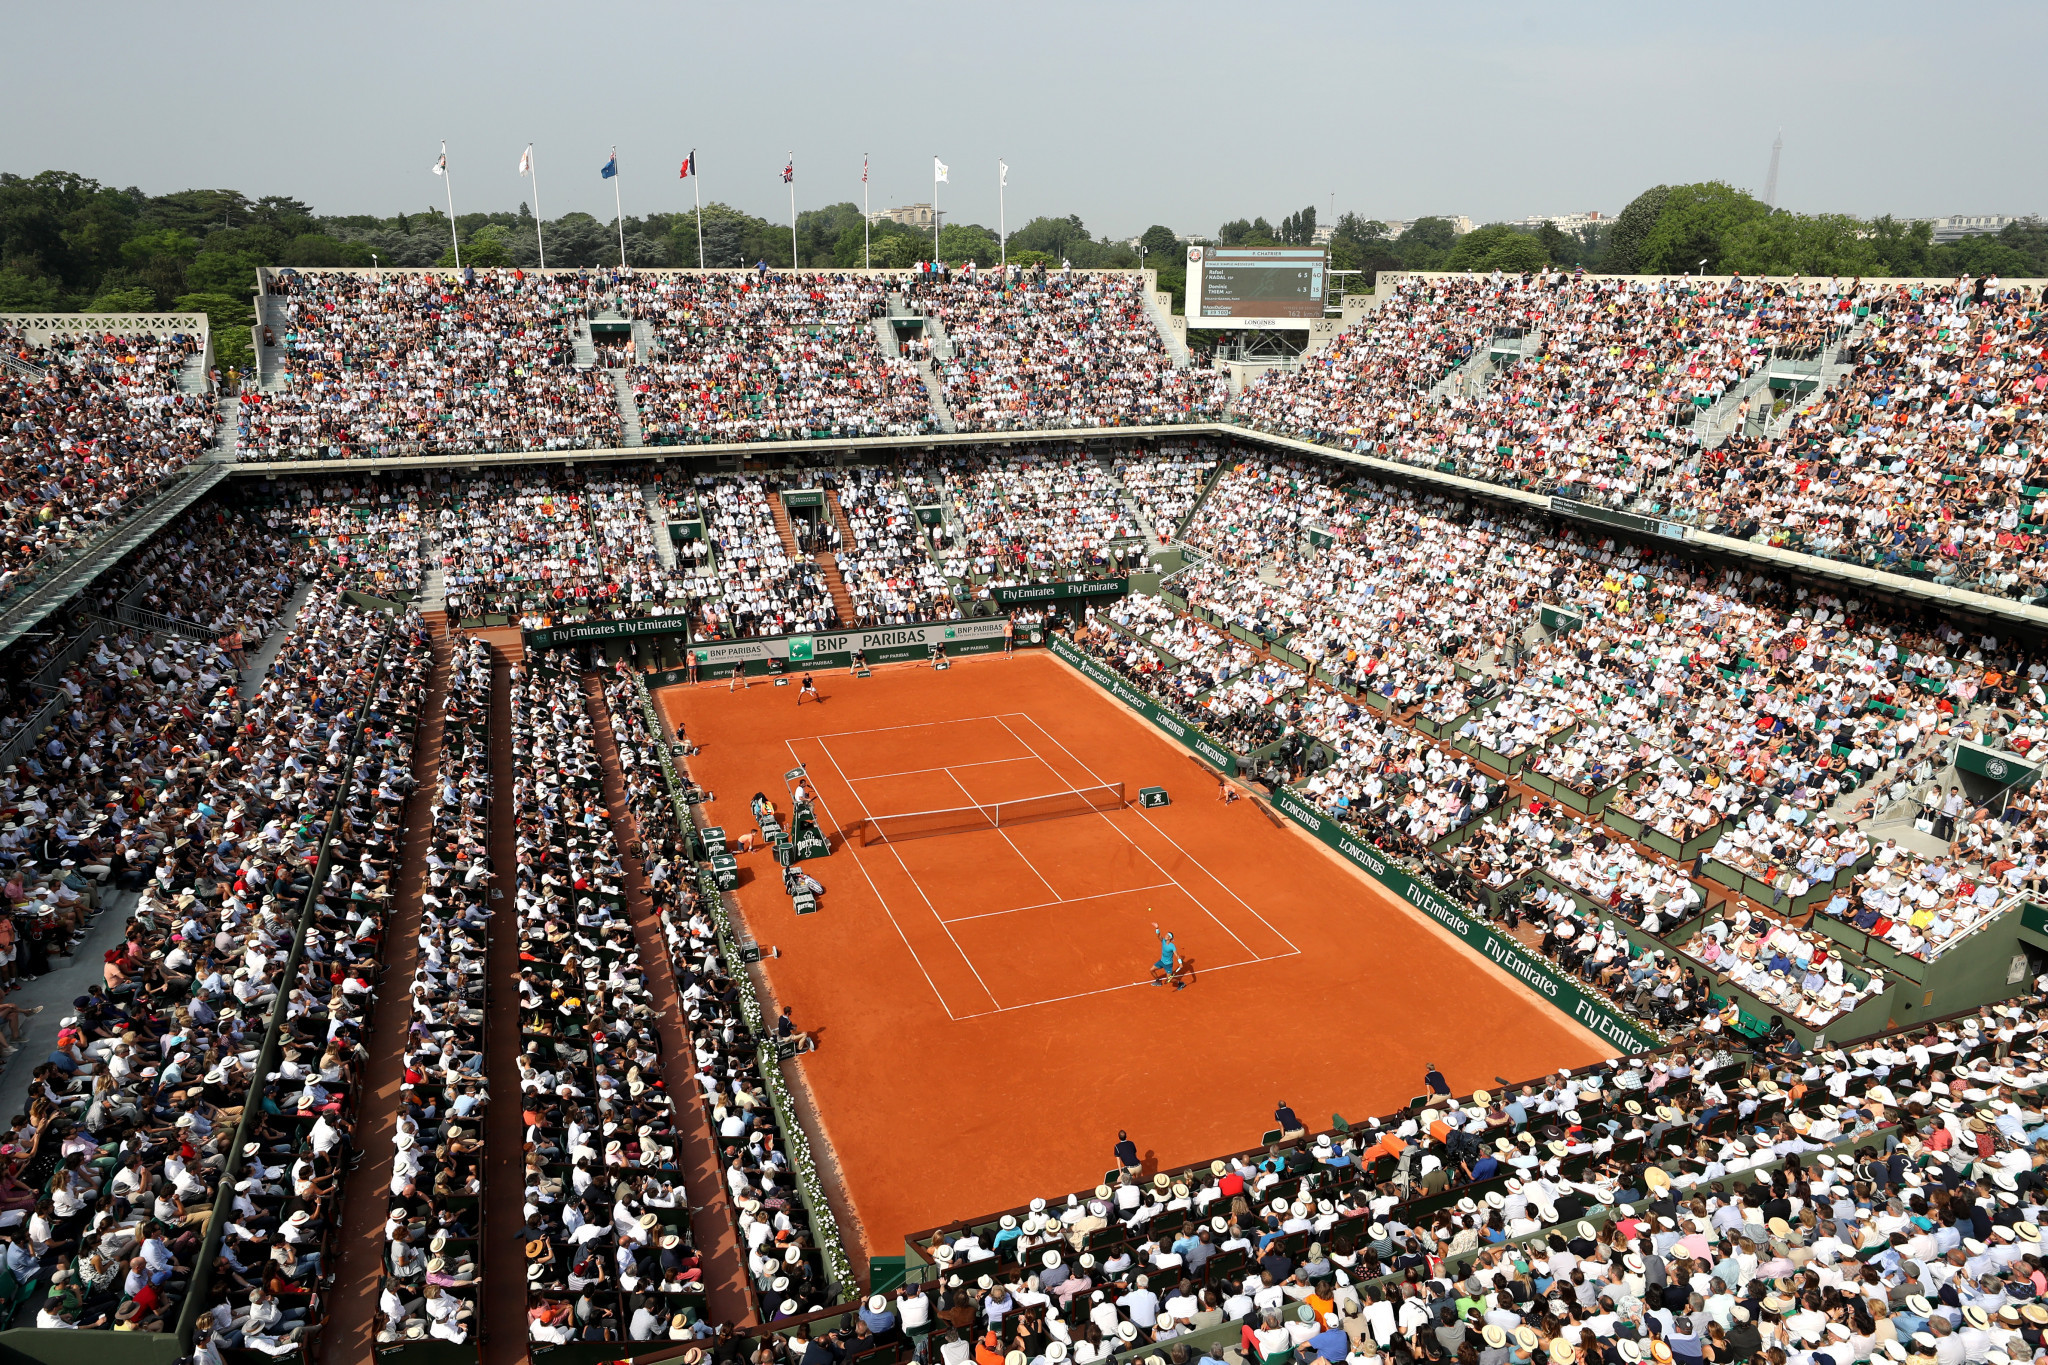 Quad wheelchair tennis to make French Open debut this year